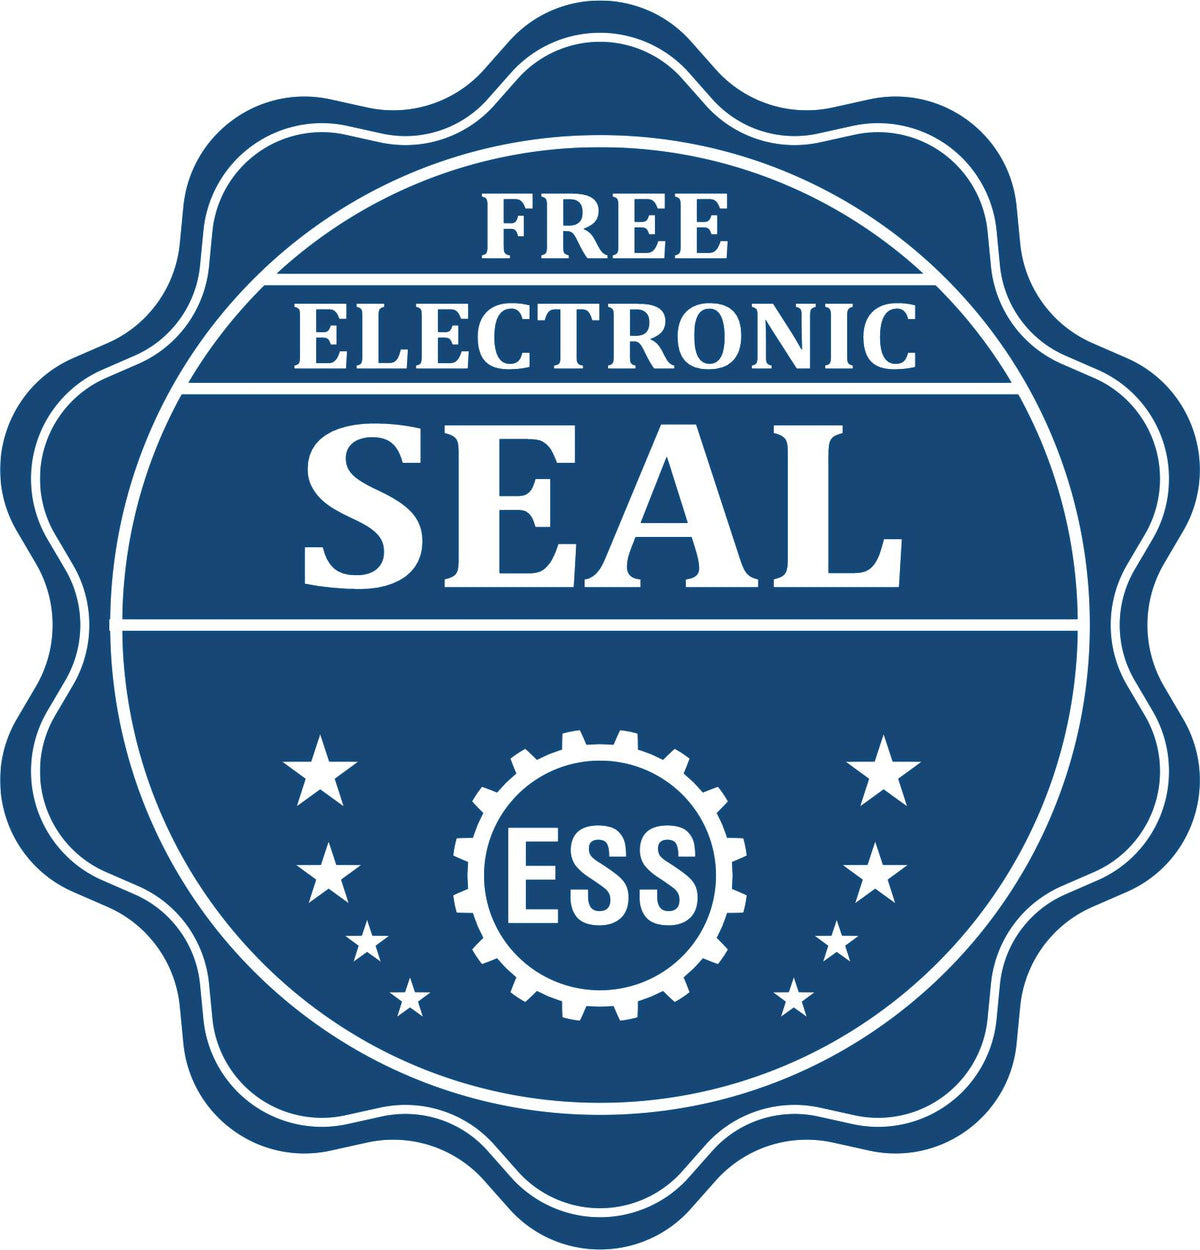 A badge showing a free electronic seal for the Soft Maine Professional Geologist Seal with stars and the ESS gear on the emblem.